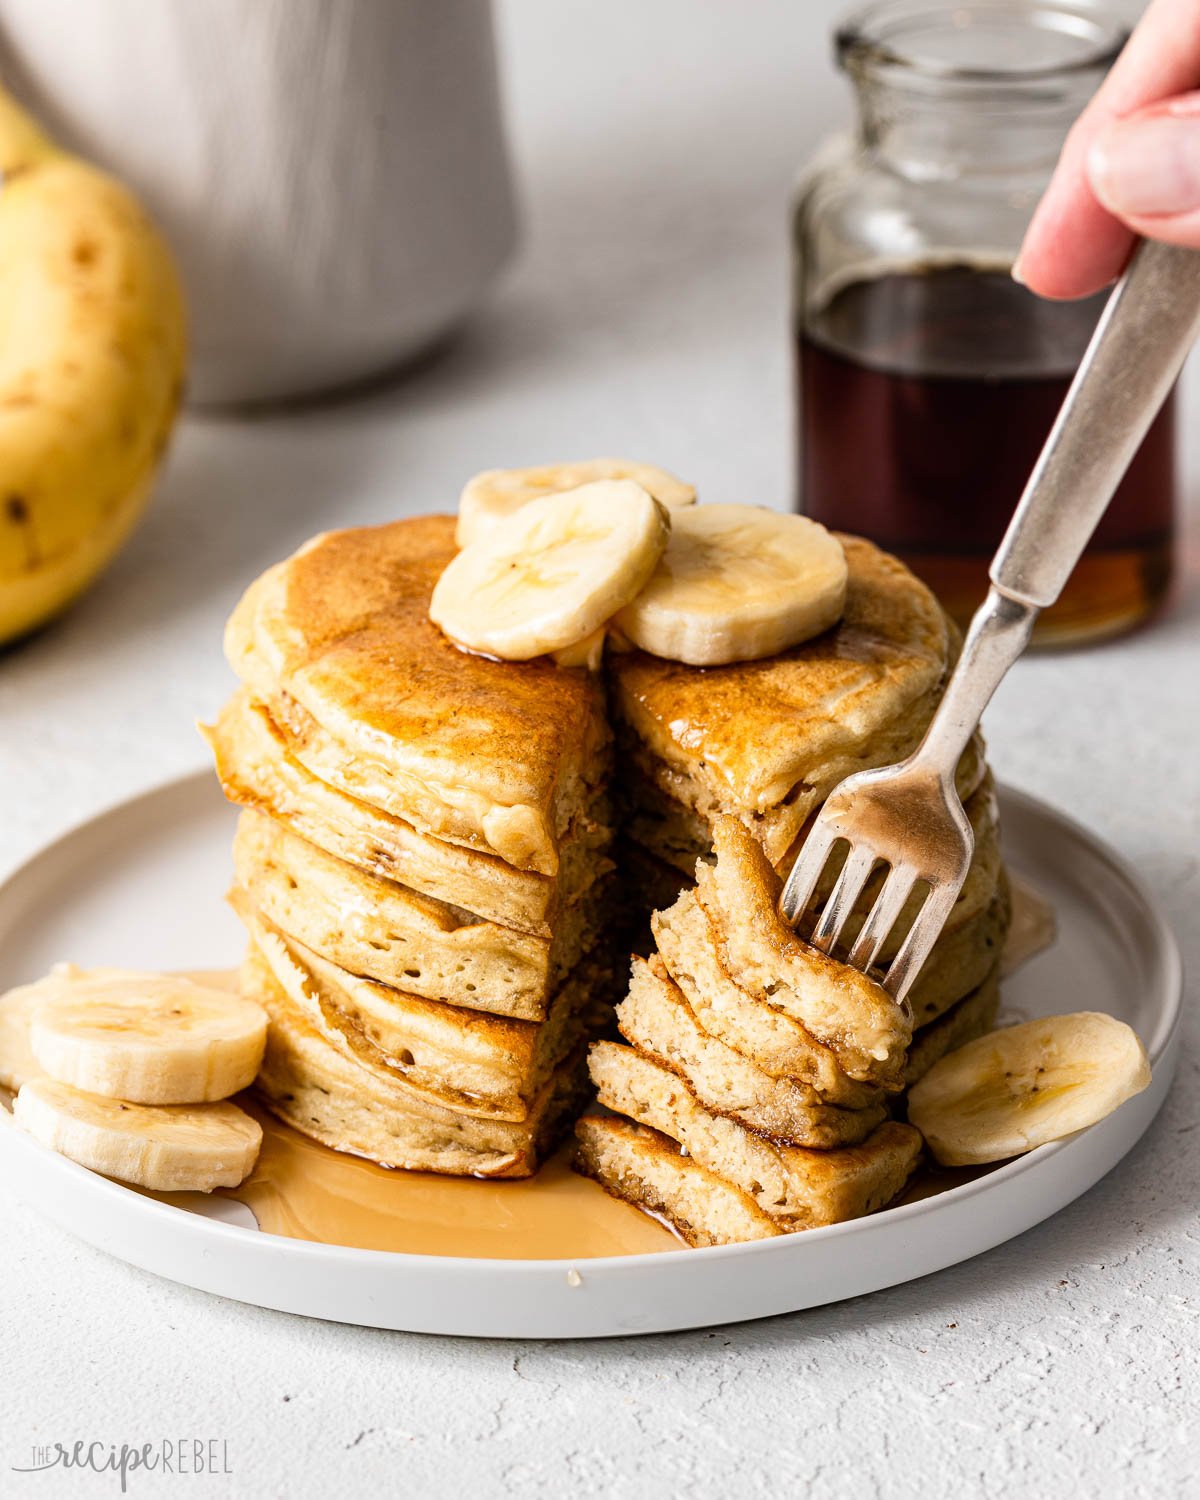 a fork full of pancakes with a stack of pancakes, bananas, and syrup.